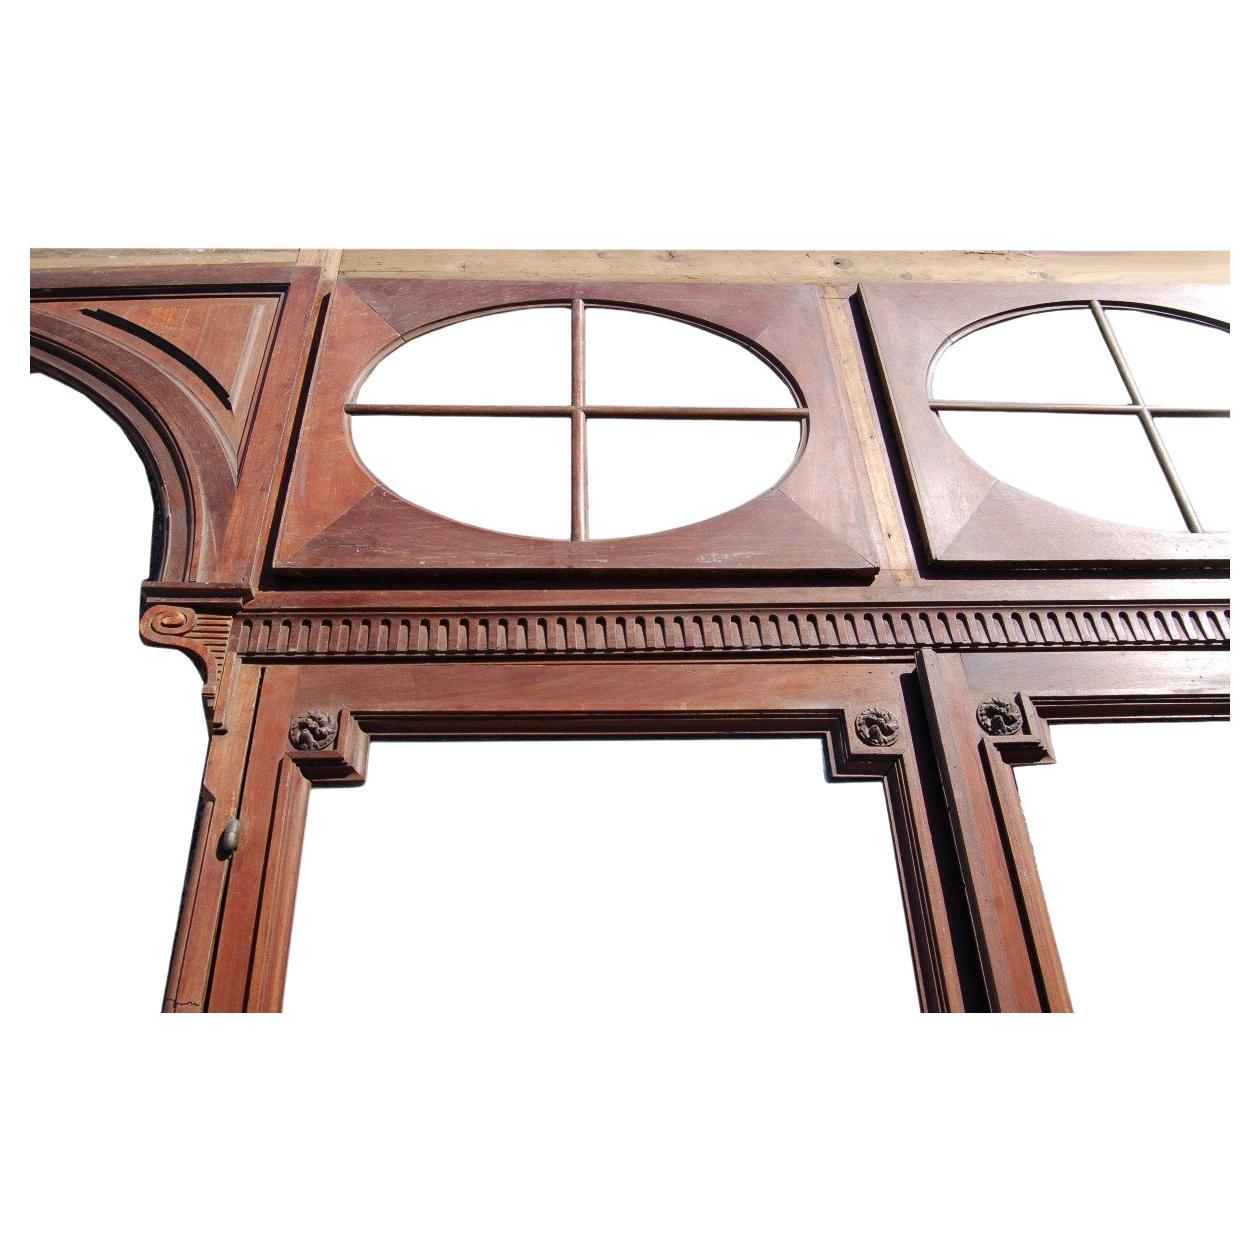 Alcove Woodwork W 224.410 x H 129.920 In Mahogany Louis XVI Style For Sale